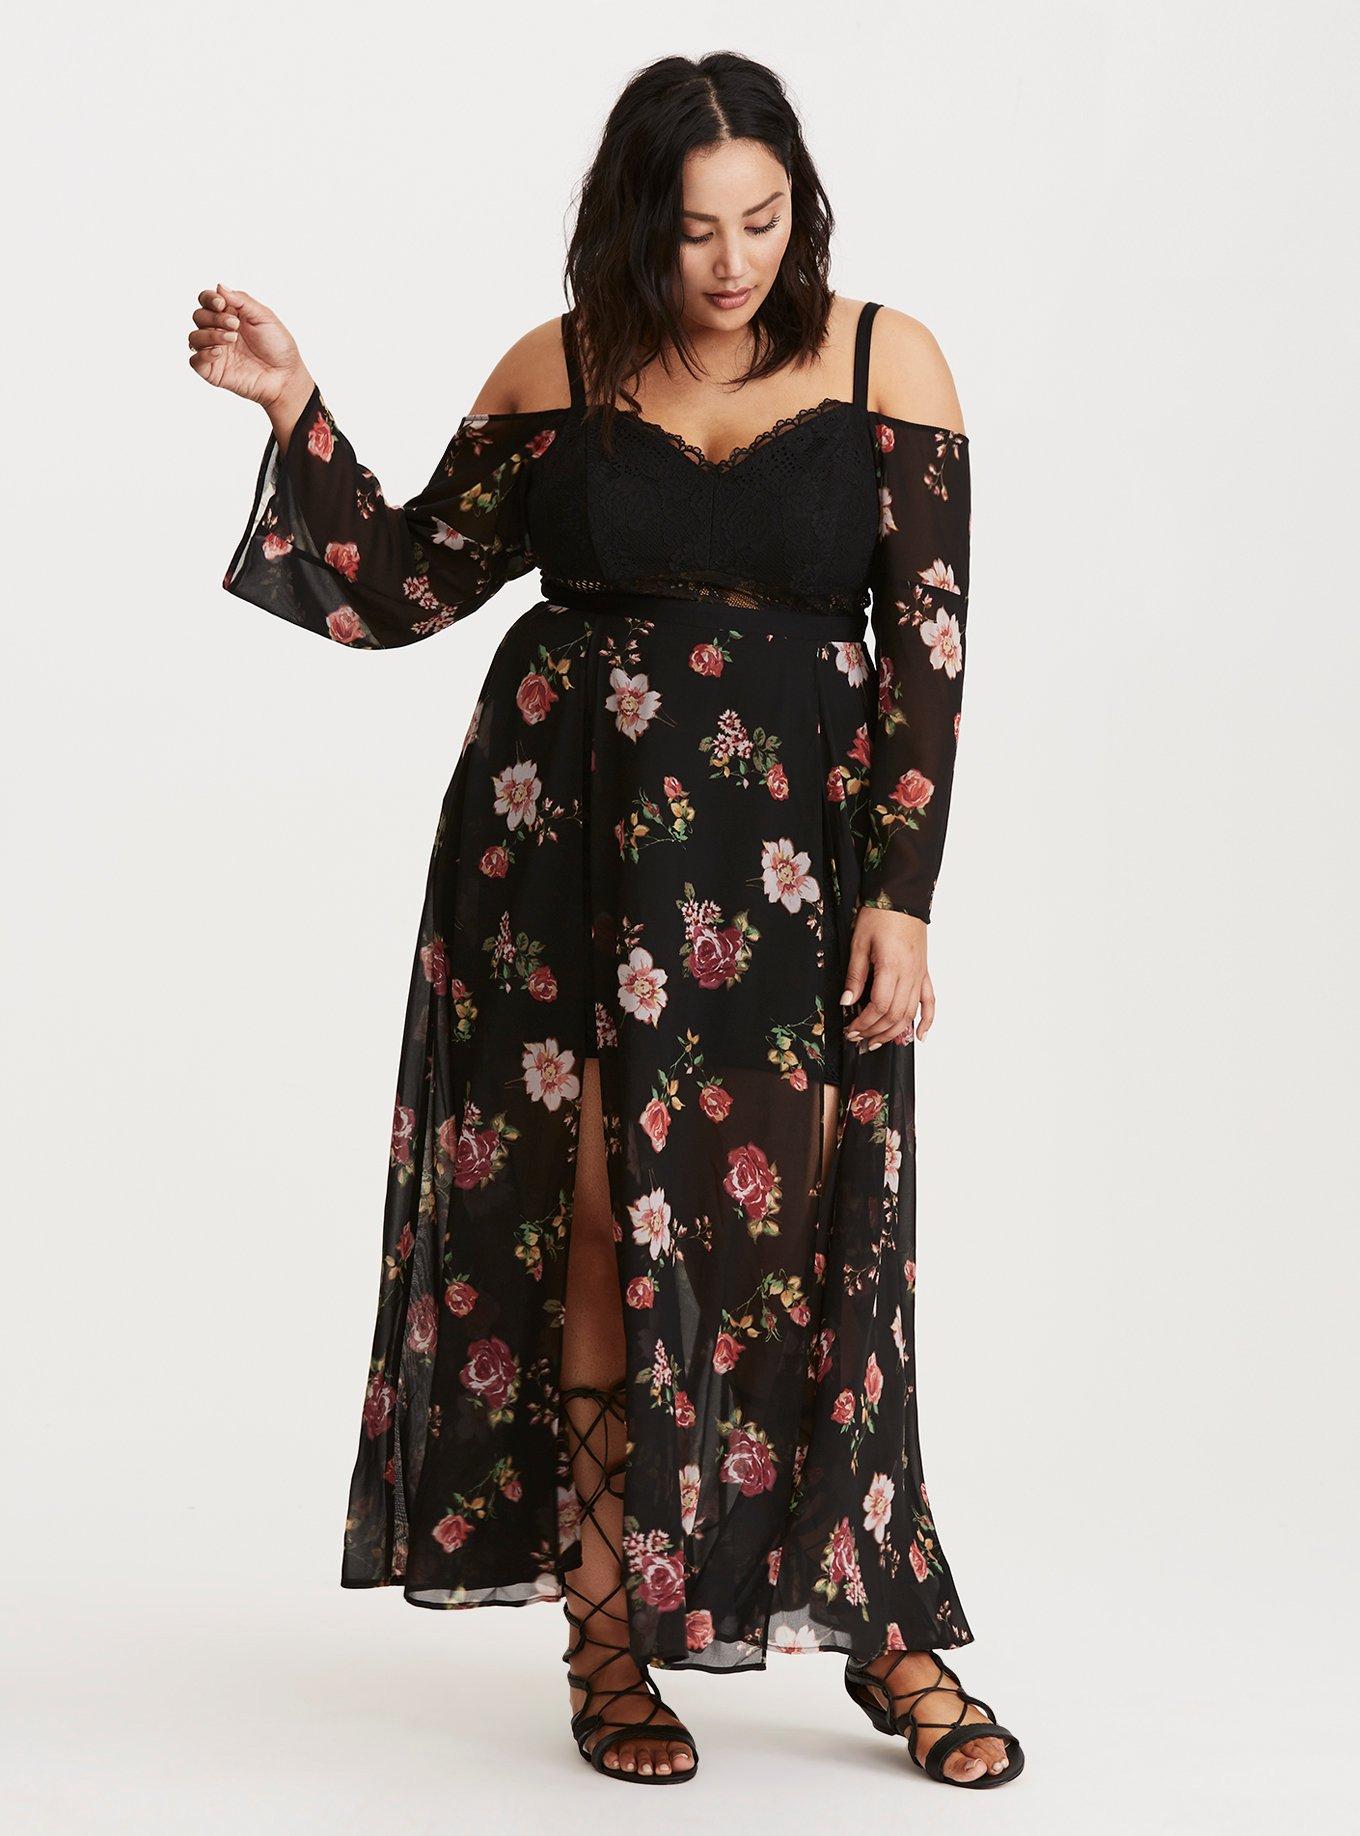 Women's Plus Size 1x black floral maxi dress New With Tags